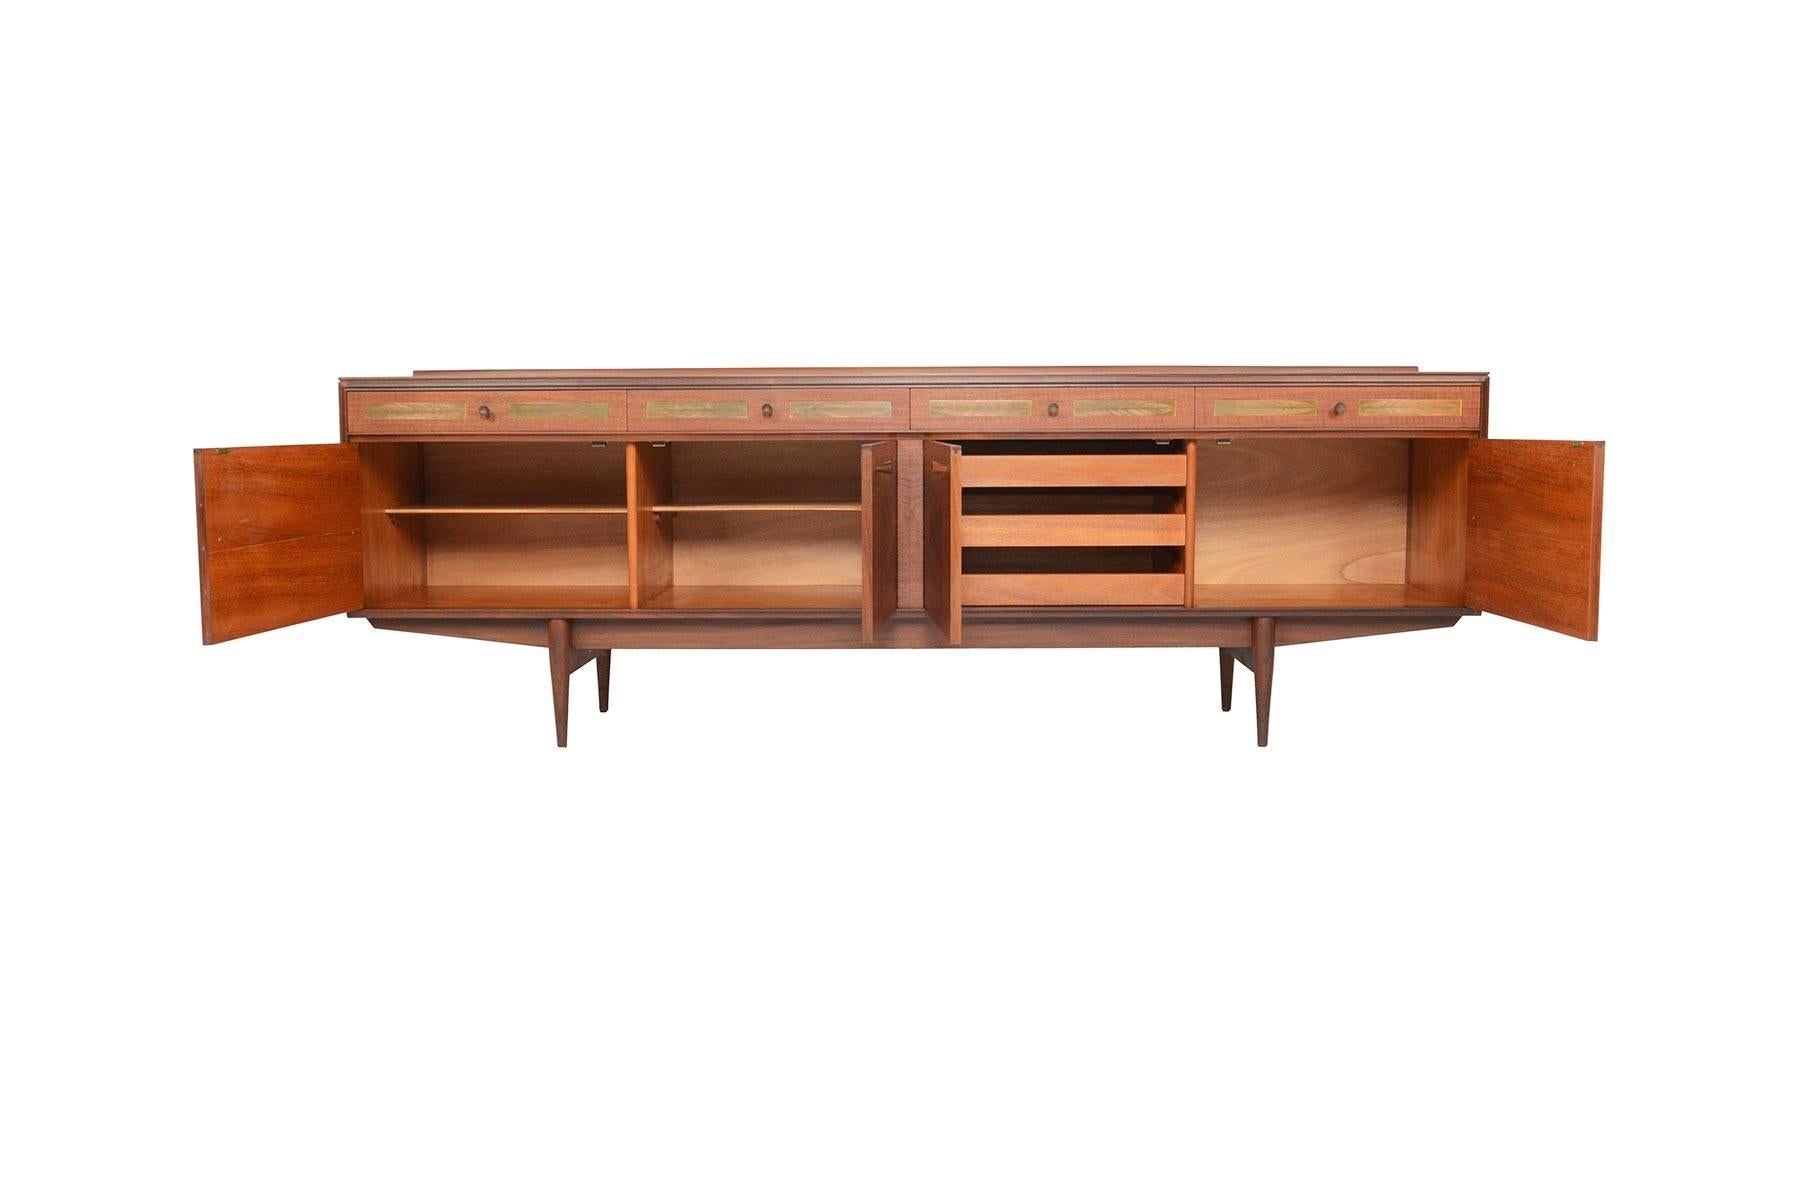 This English modern midcentury large teak credenza was designed by Robert Heritage for Archie Shine Furniture in the 1960s. This stately piece offers four bays outfitted with removable shelves and drawers. Four drawers sit above, each adorned with